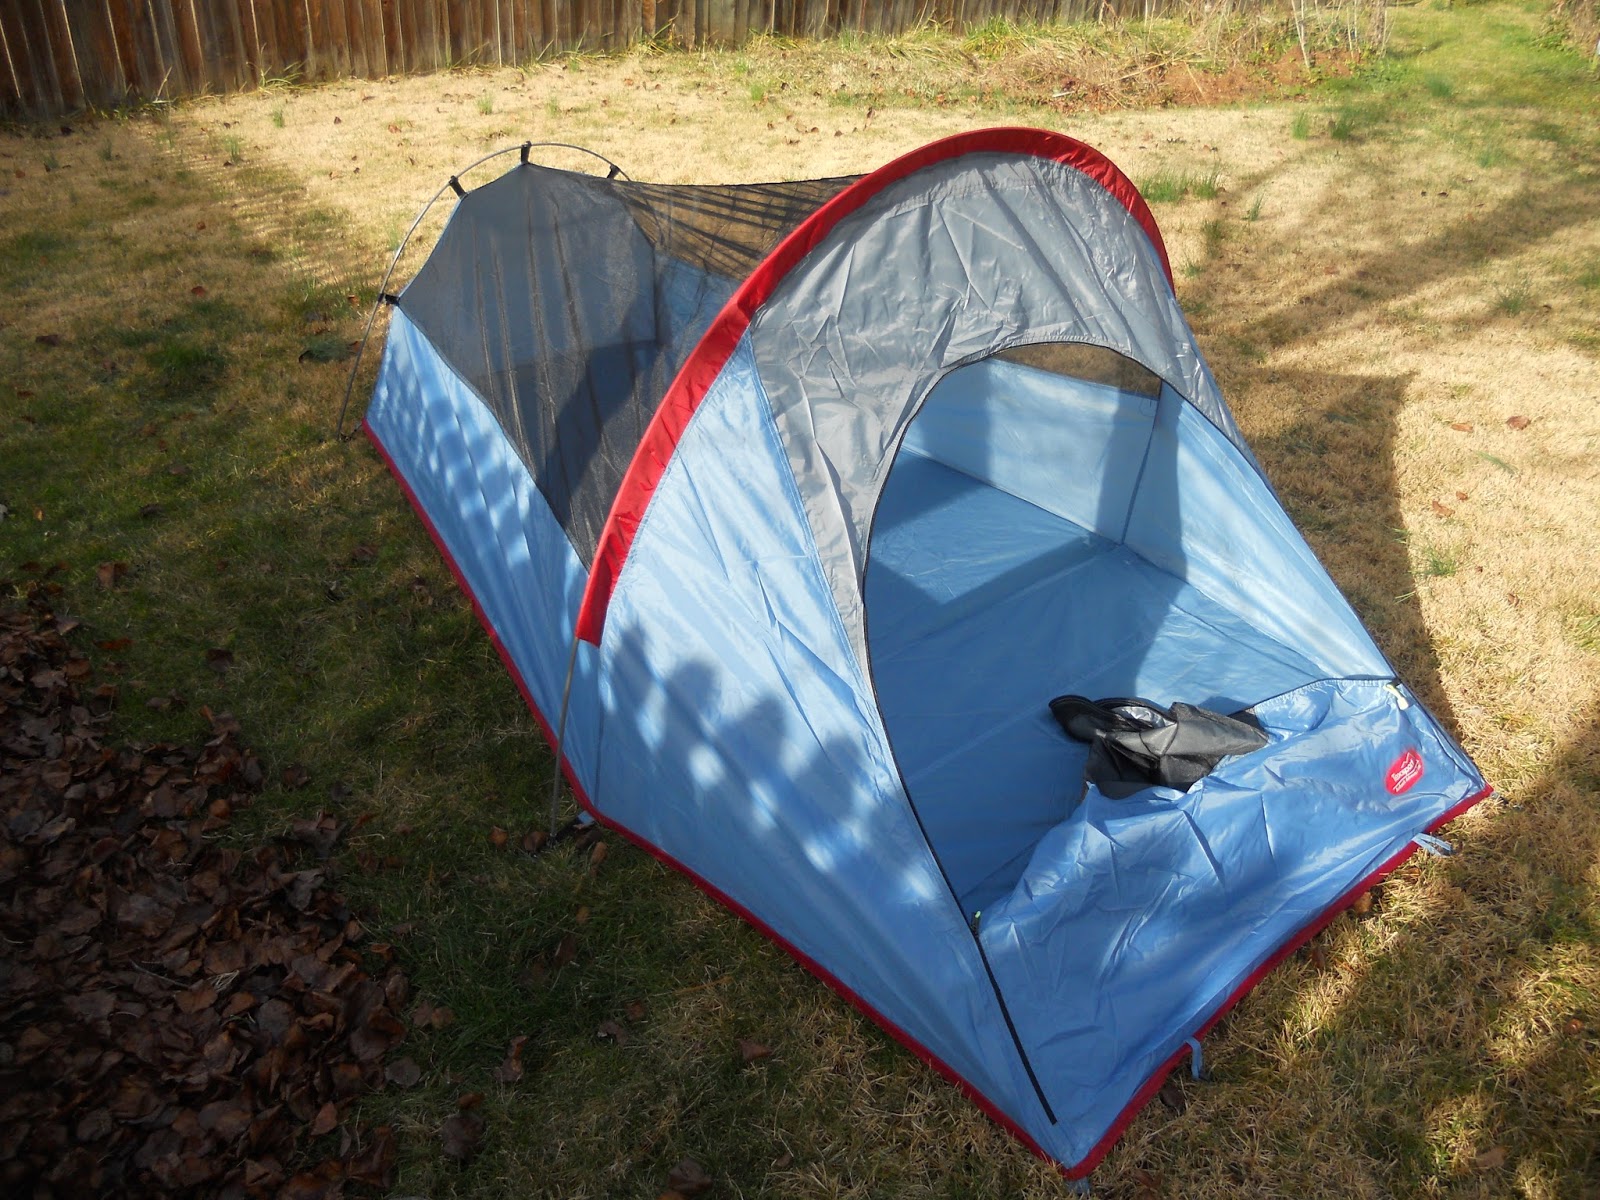 Texsport Saguaro Bivy Shelter Tent from Starboard Side